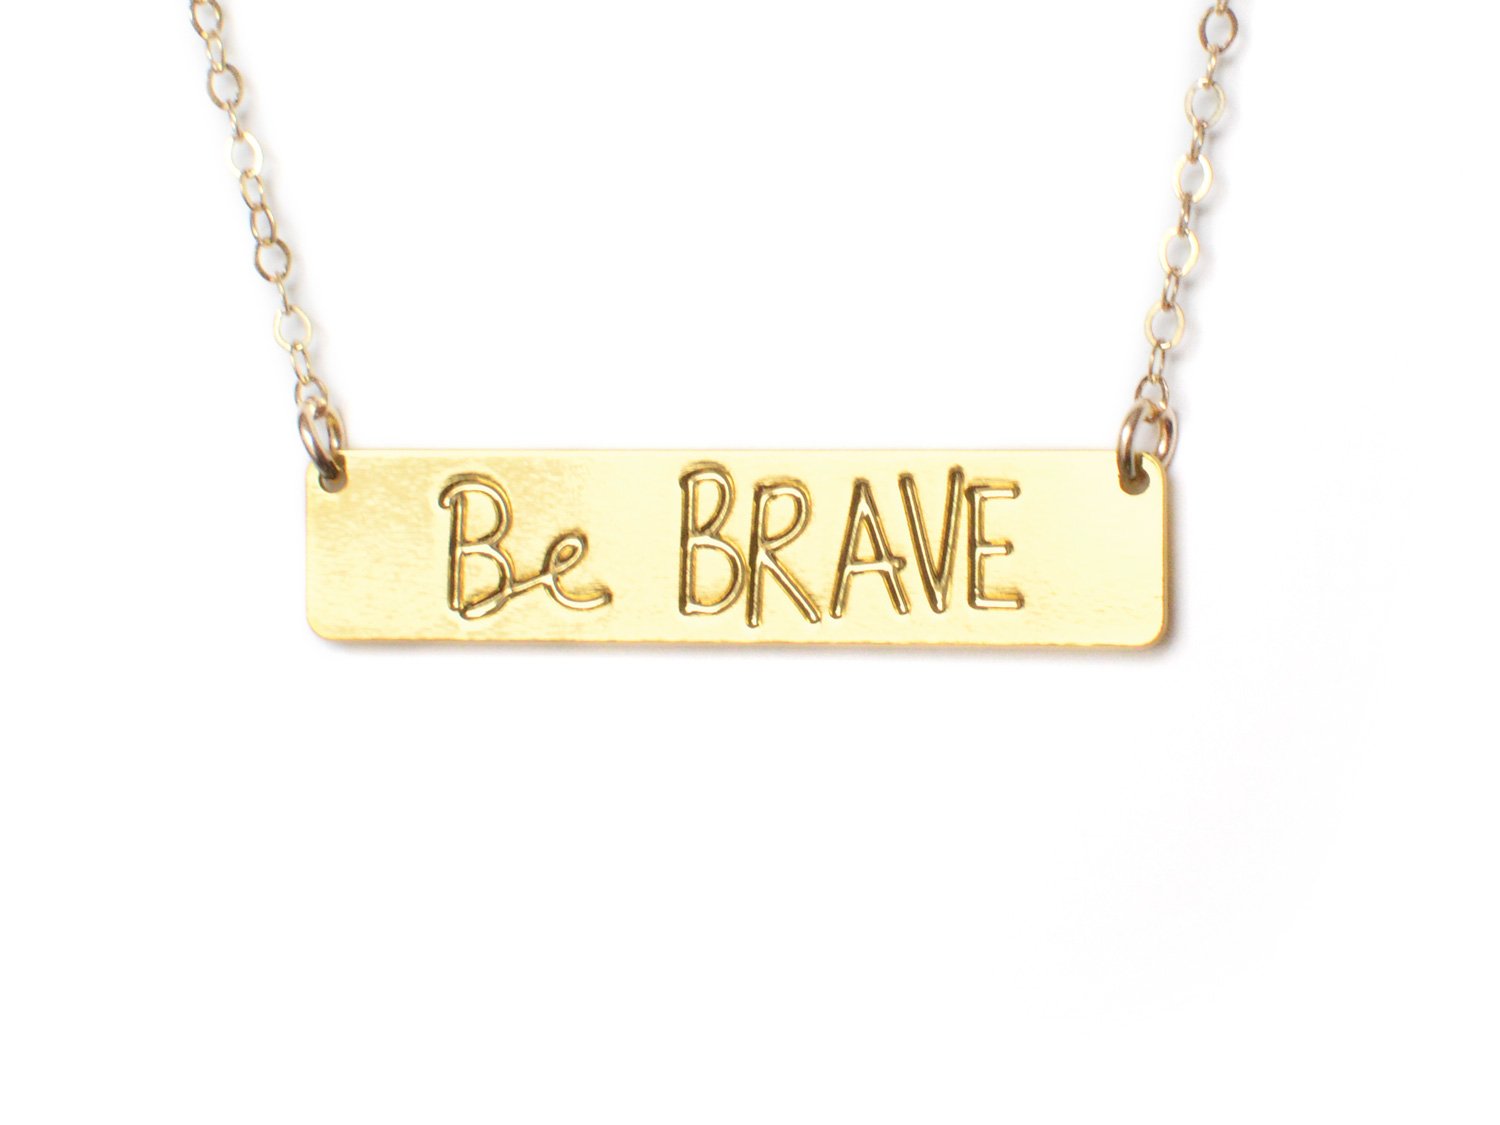 Be Brave Bar Necklace - High Quality, Affordable, Hand Written, Empowering, Self Love, Mantra Word Necklace - Available in Gold and Silver - Made in USA - Brevity Jewelry